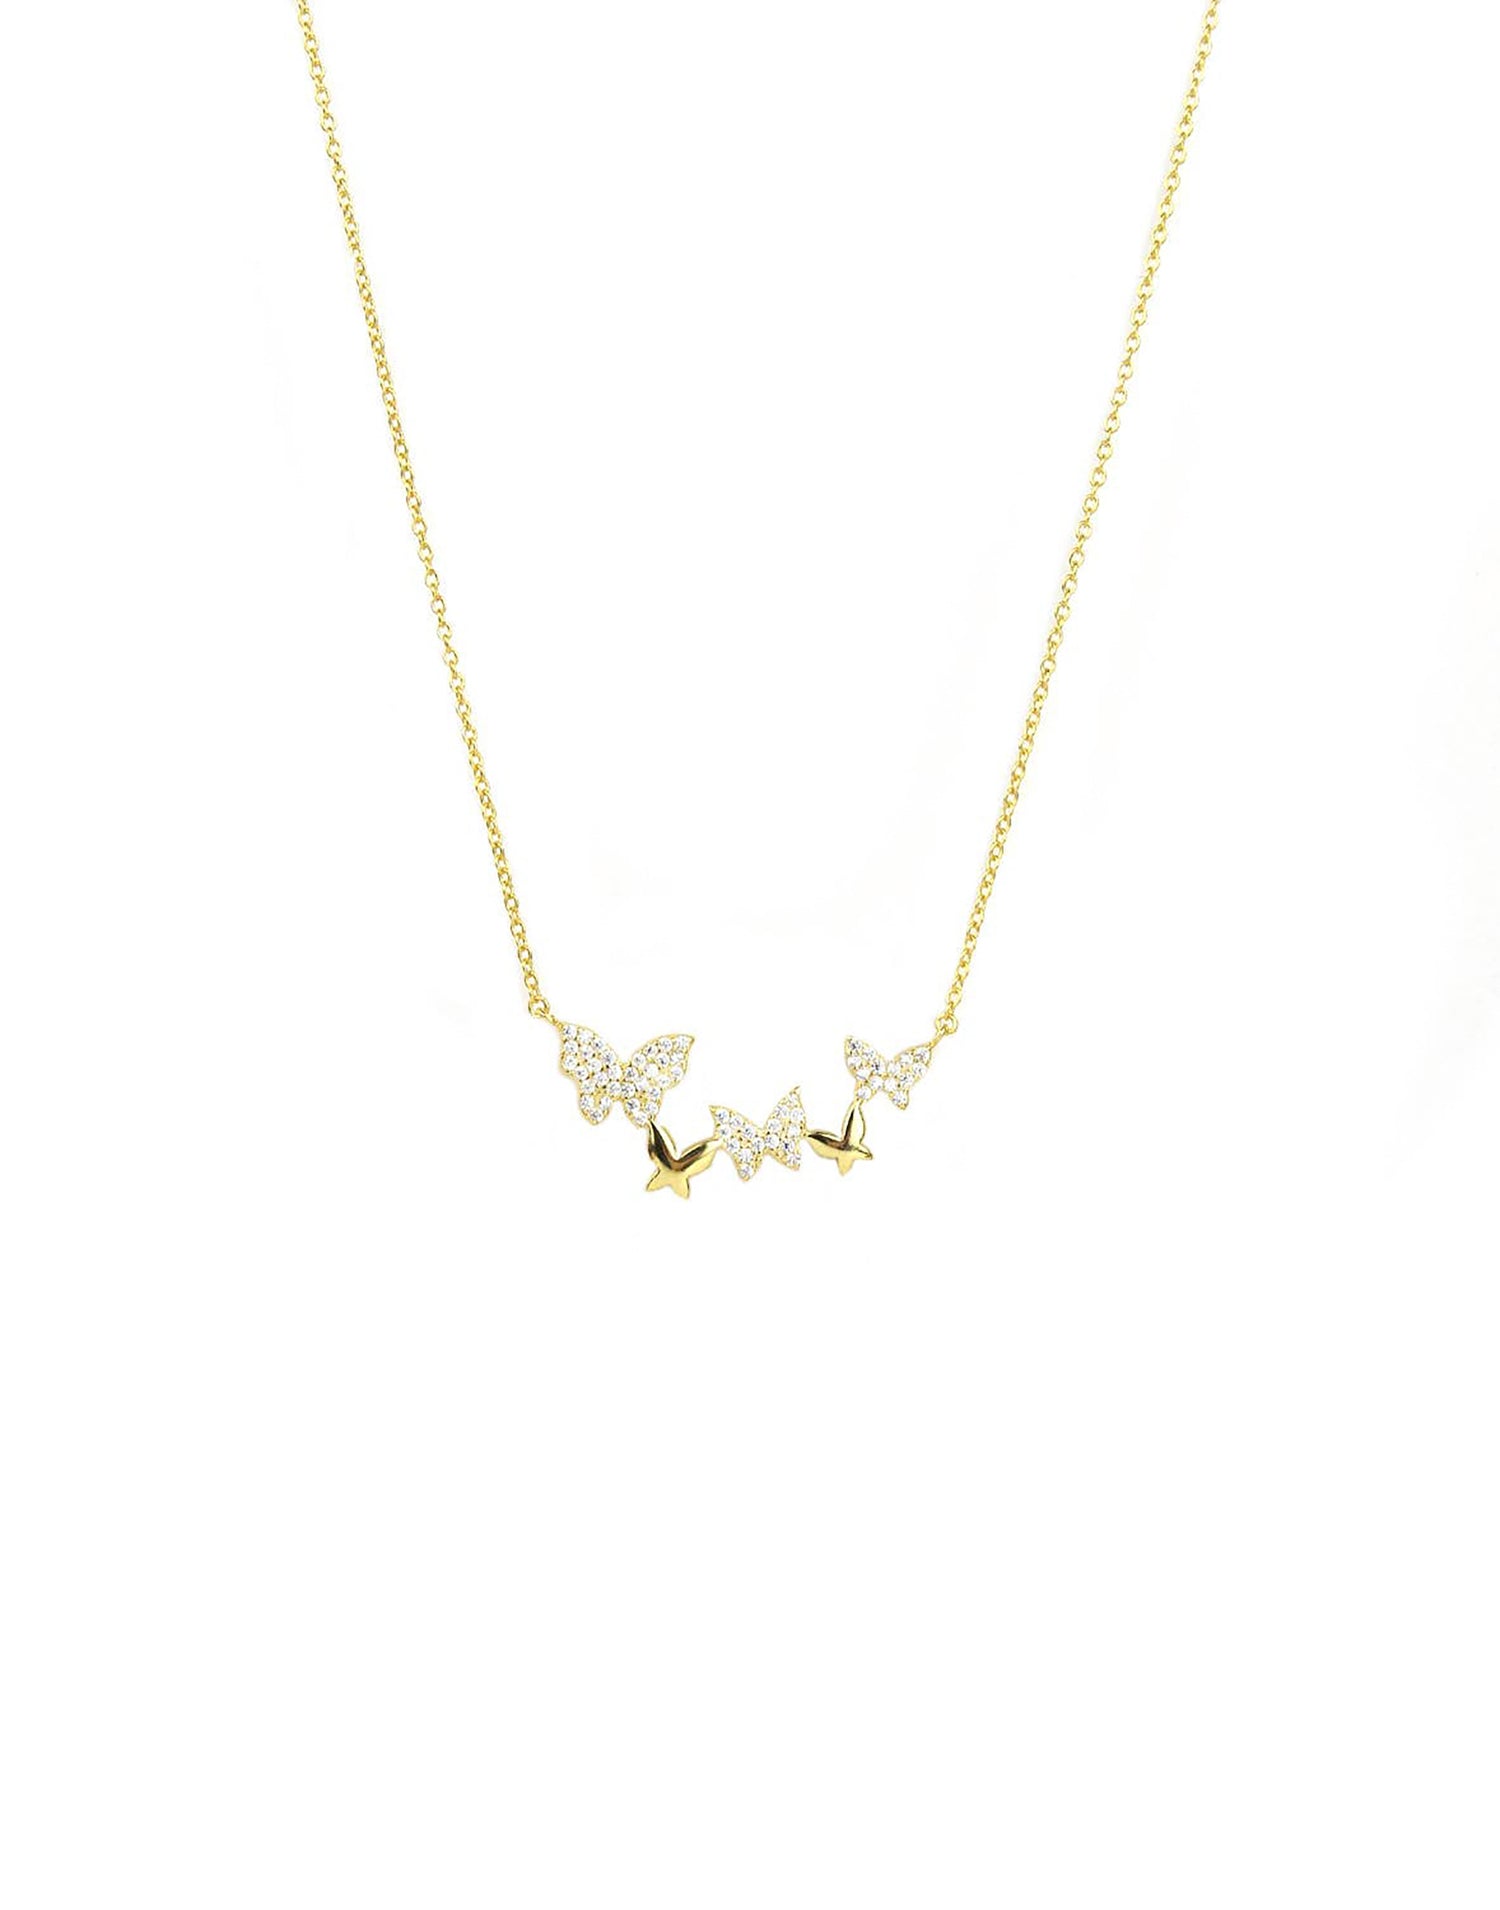 Butterfly Cluster Necklace by Marlyn Schiff in Gold - Product View